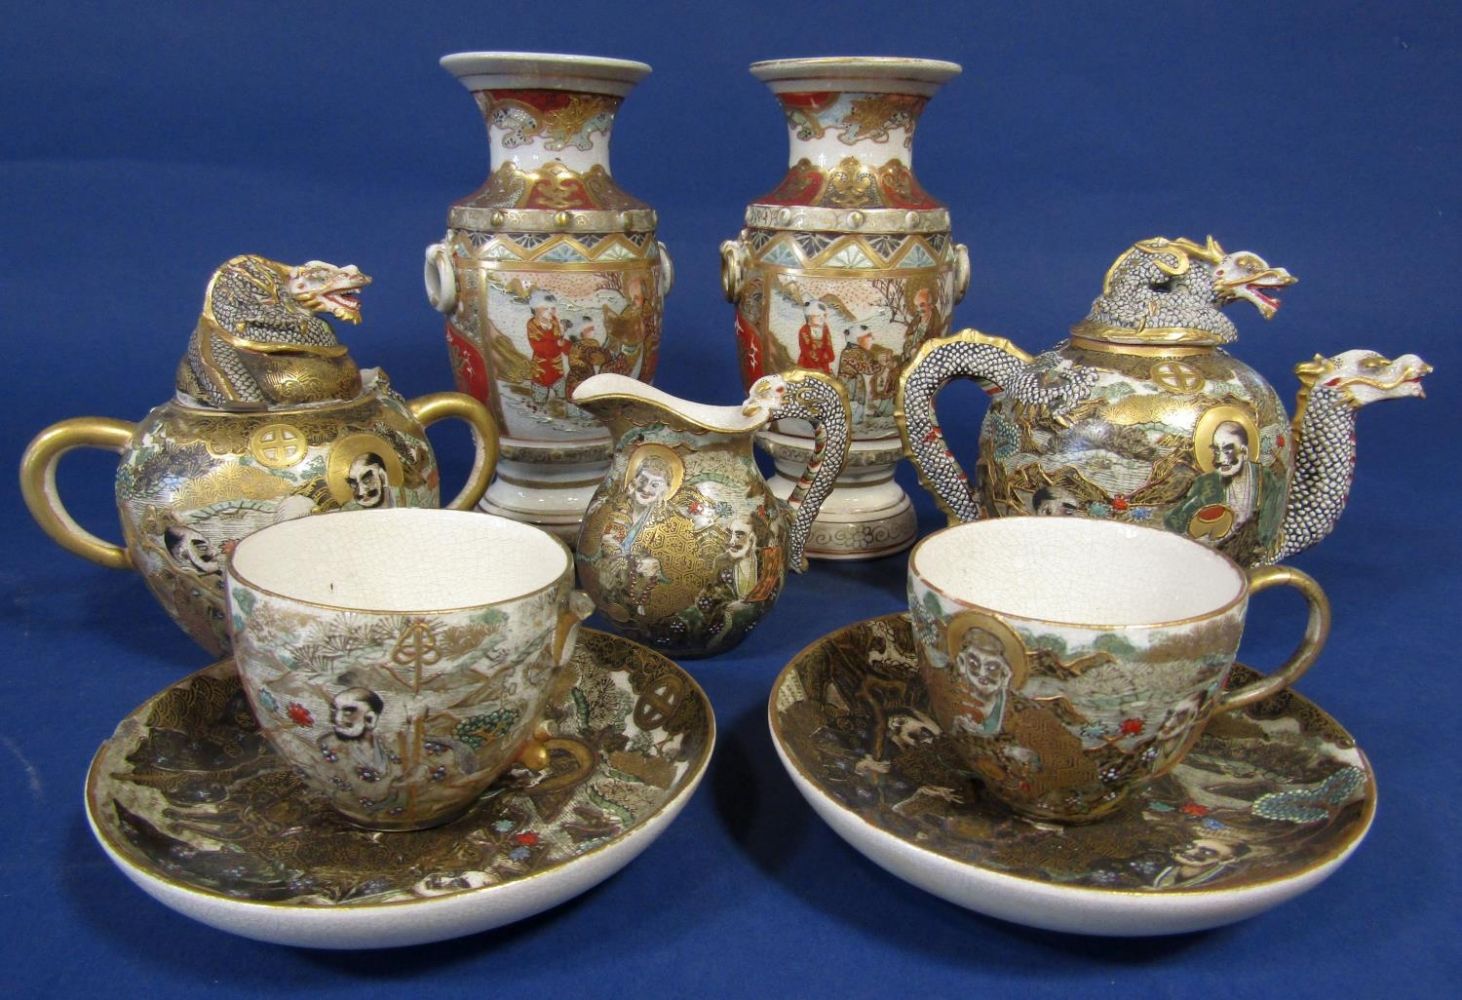 Sale of Antiques and Collectables to include Ceramics, Jewellery, Horology, Miscellaneous Effects, Furniture, Etc